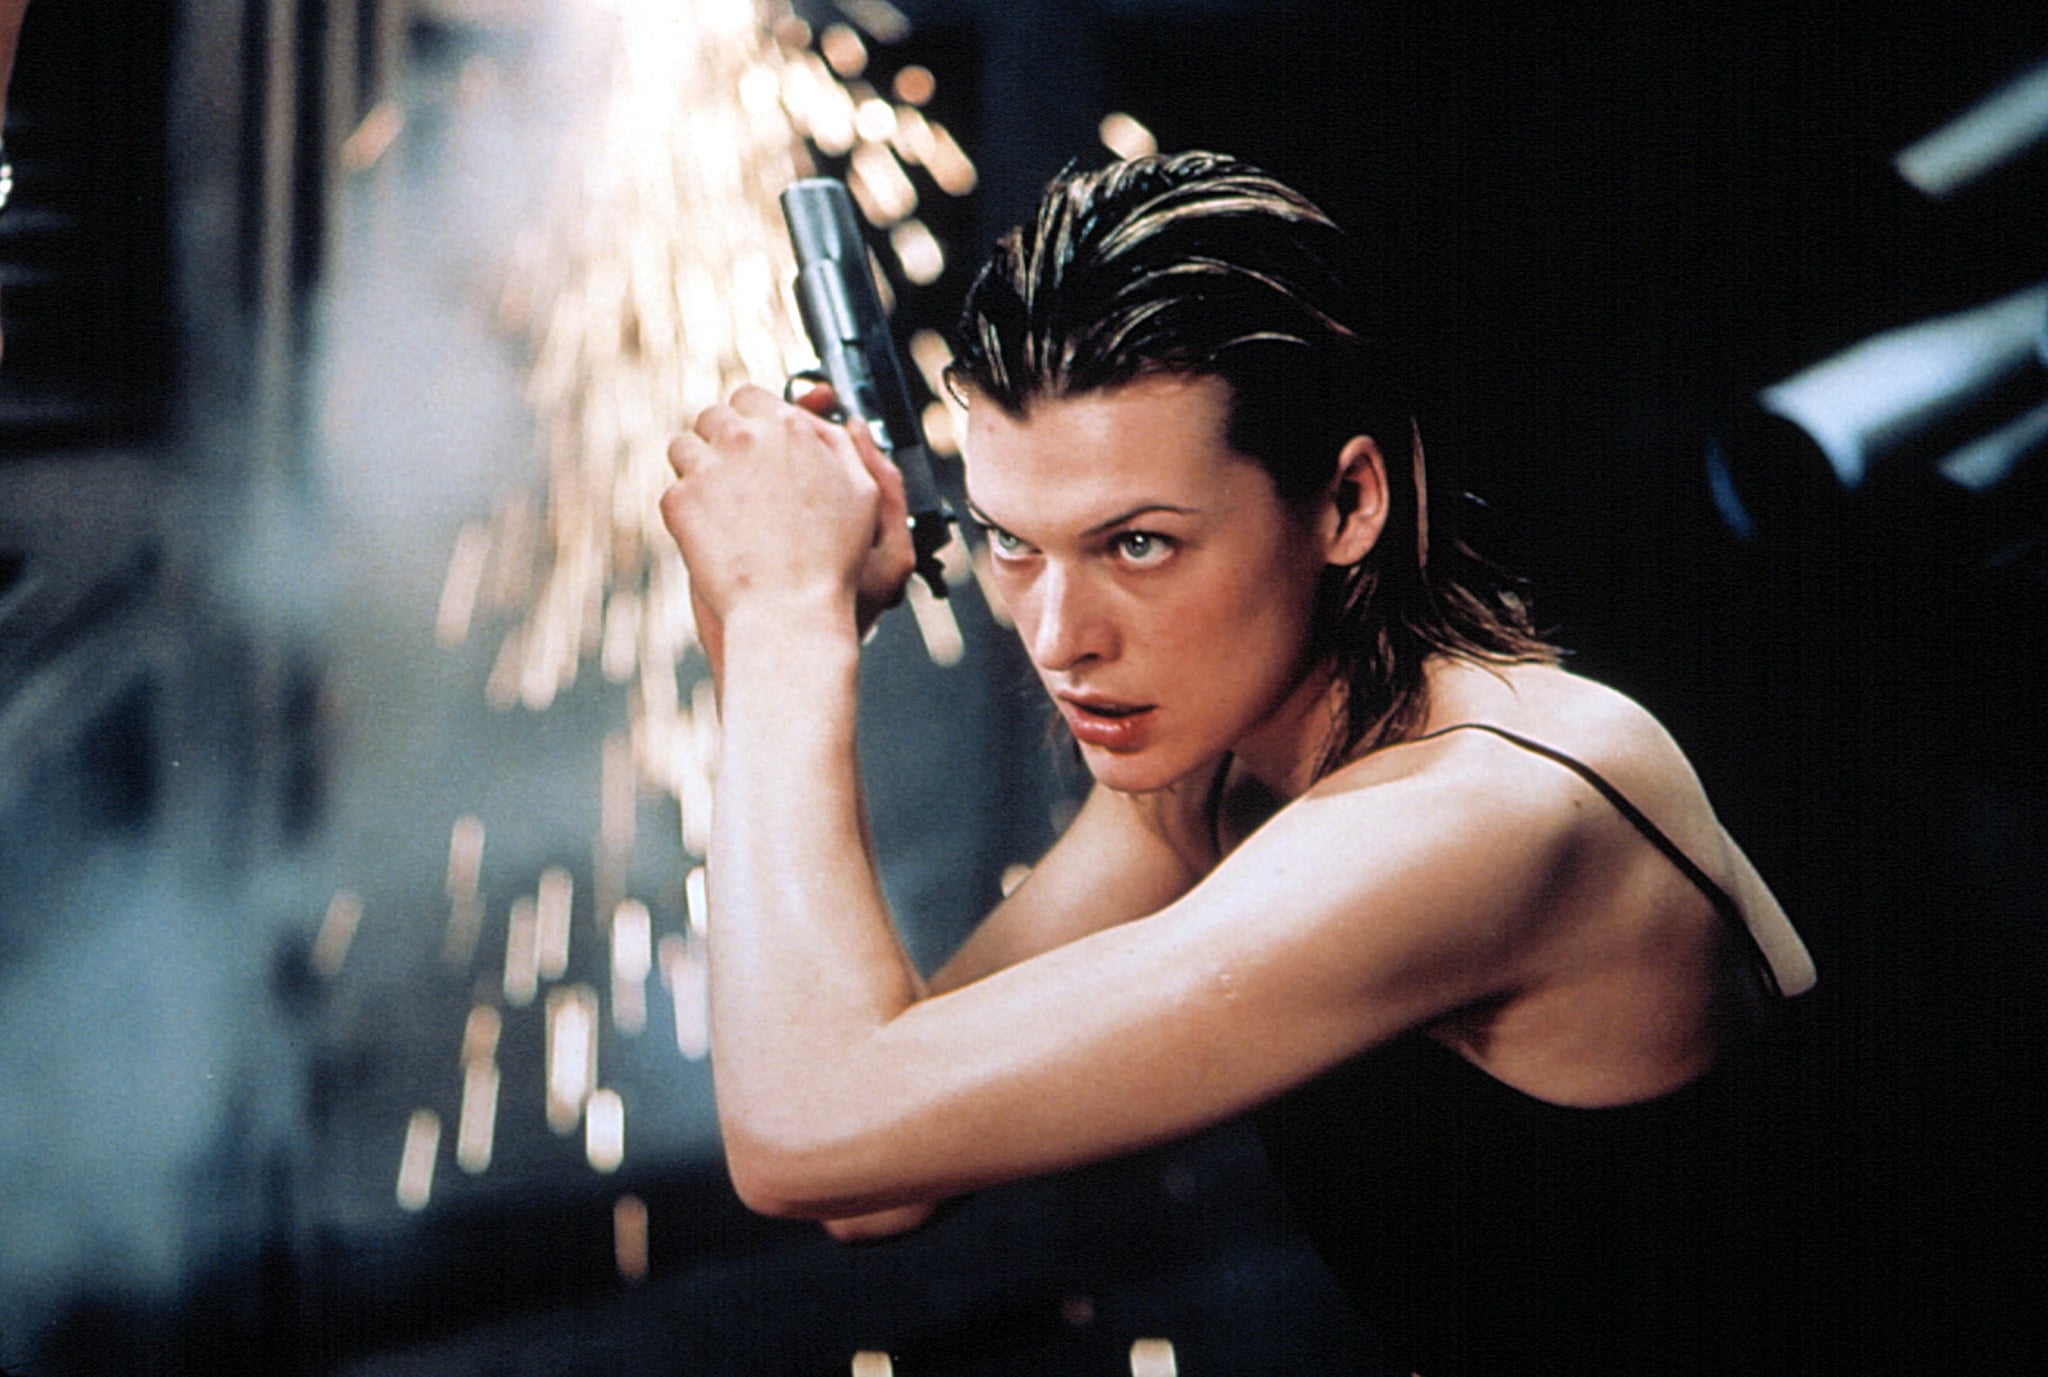 RESIDENT EVIL, Milla Jovovich in movie based on the popular video game, 2002(c) Columbia/courtesy Everett Collection.